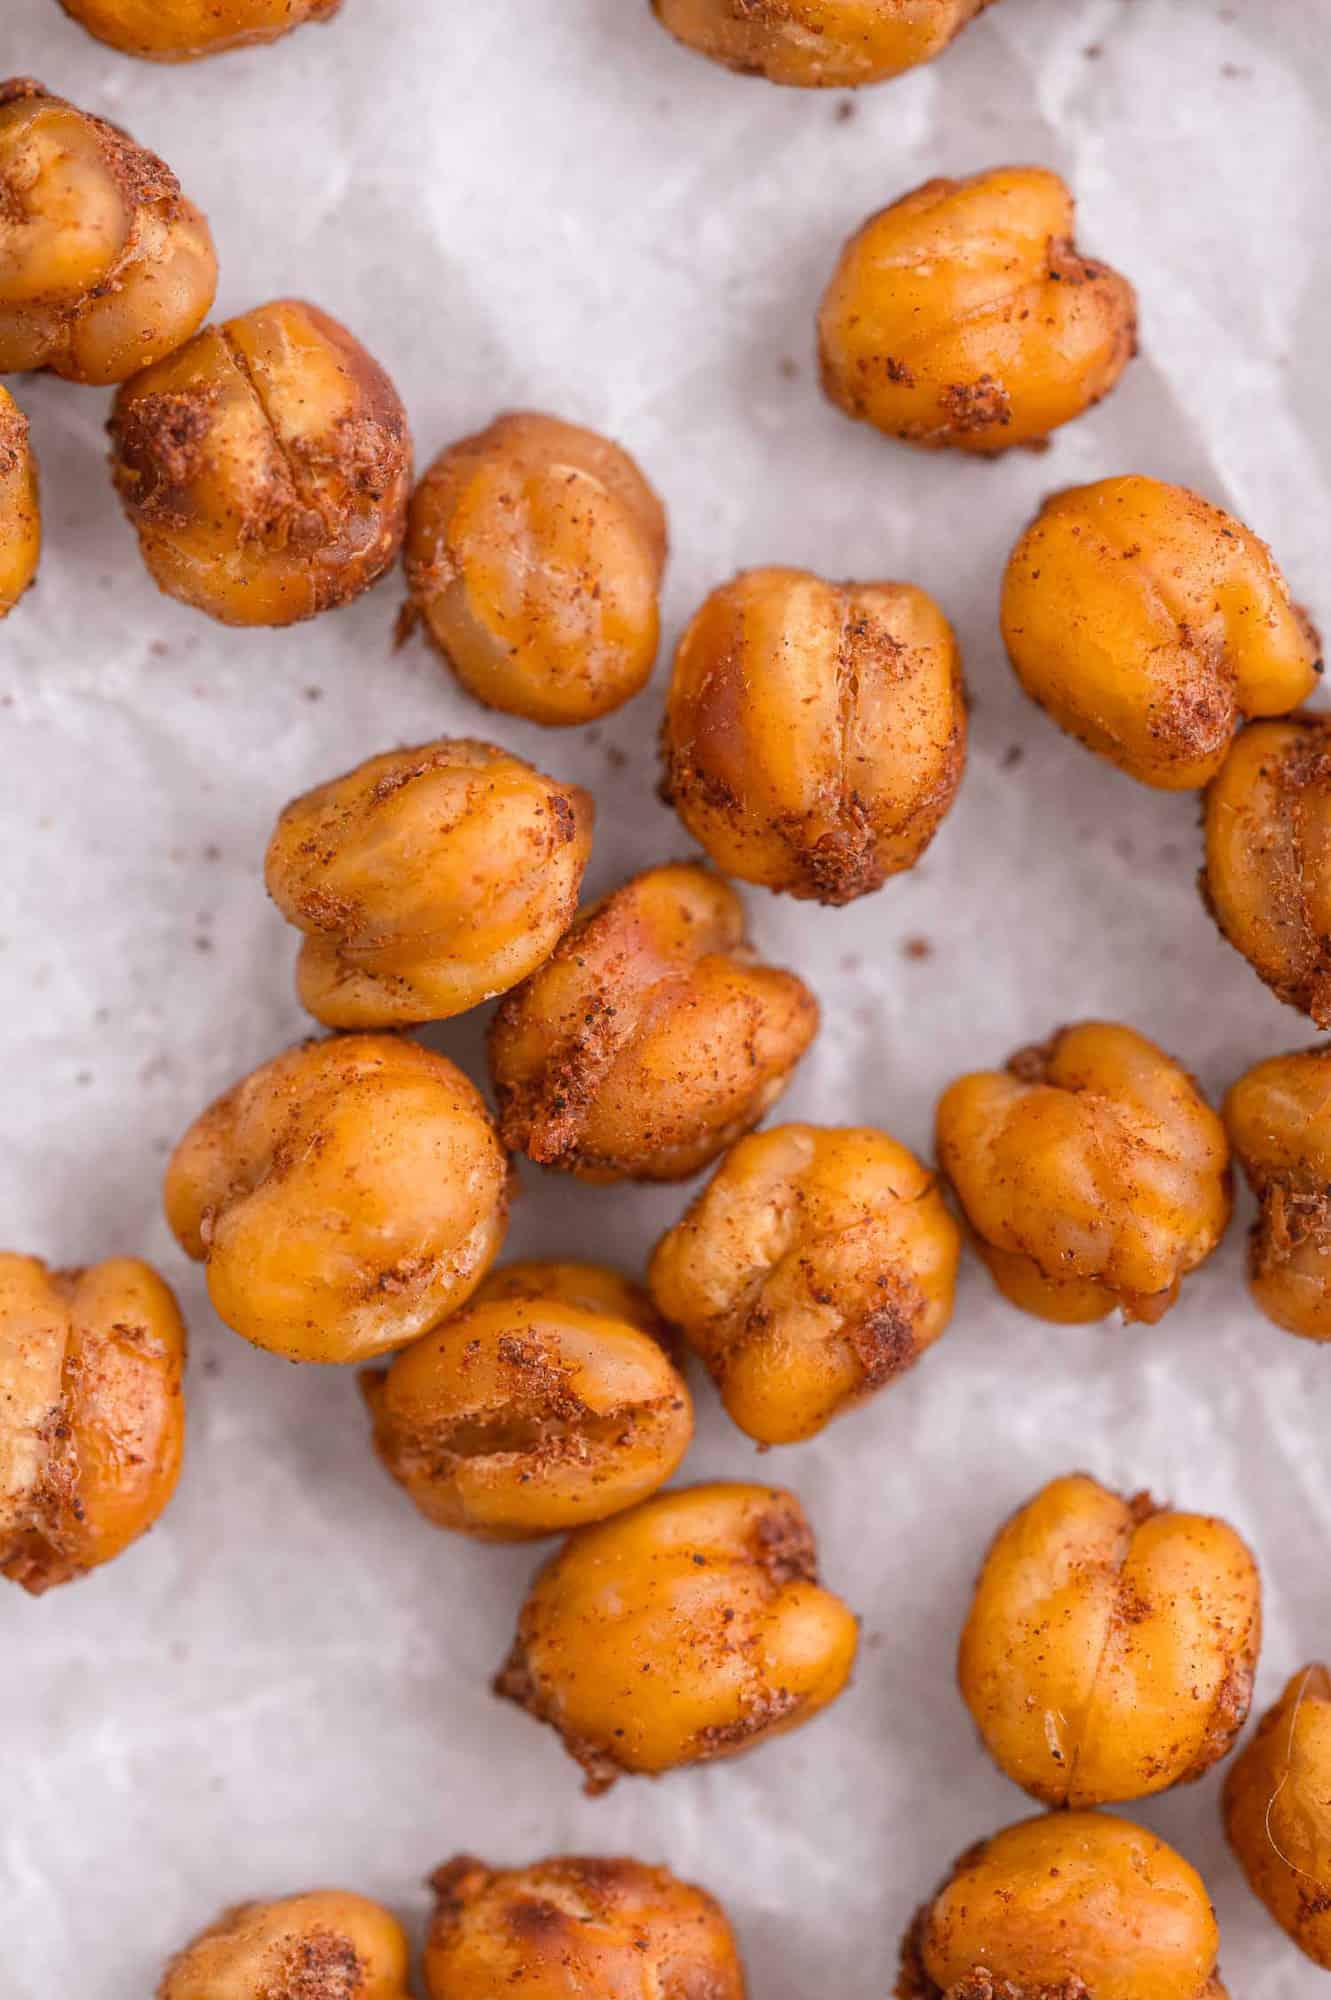 Close up view of roasted chickpeas on parchment paper.